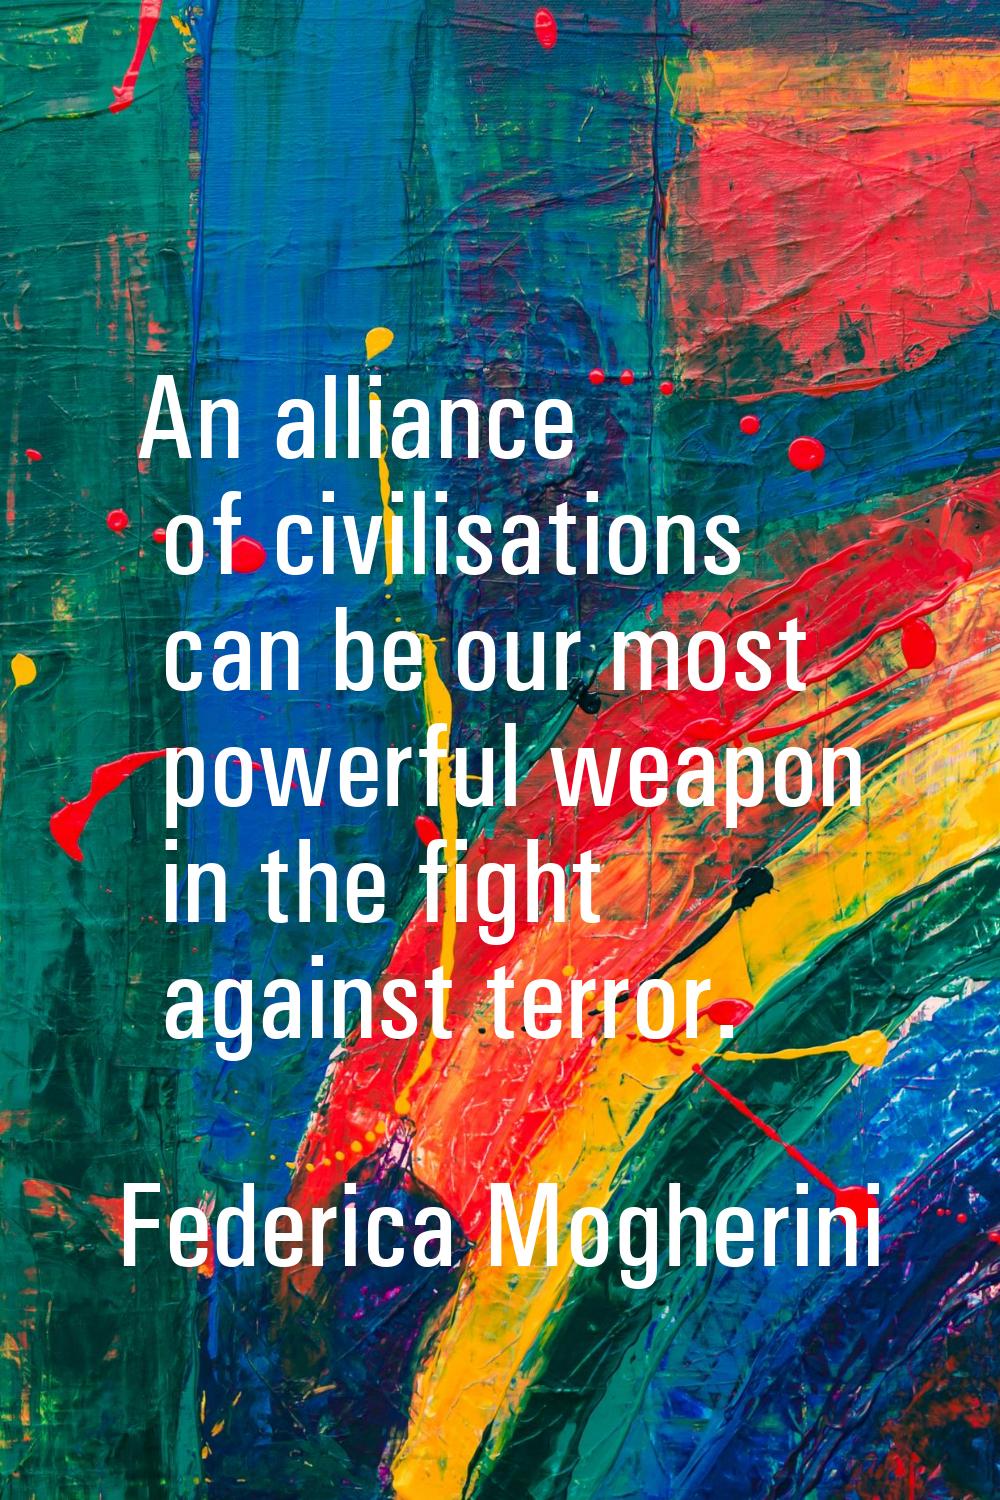 An alliance of civilisations can be our most powerful weapon in the fight against terror.